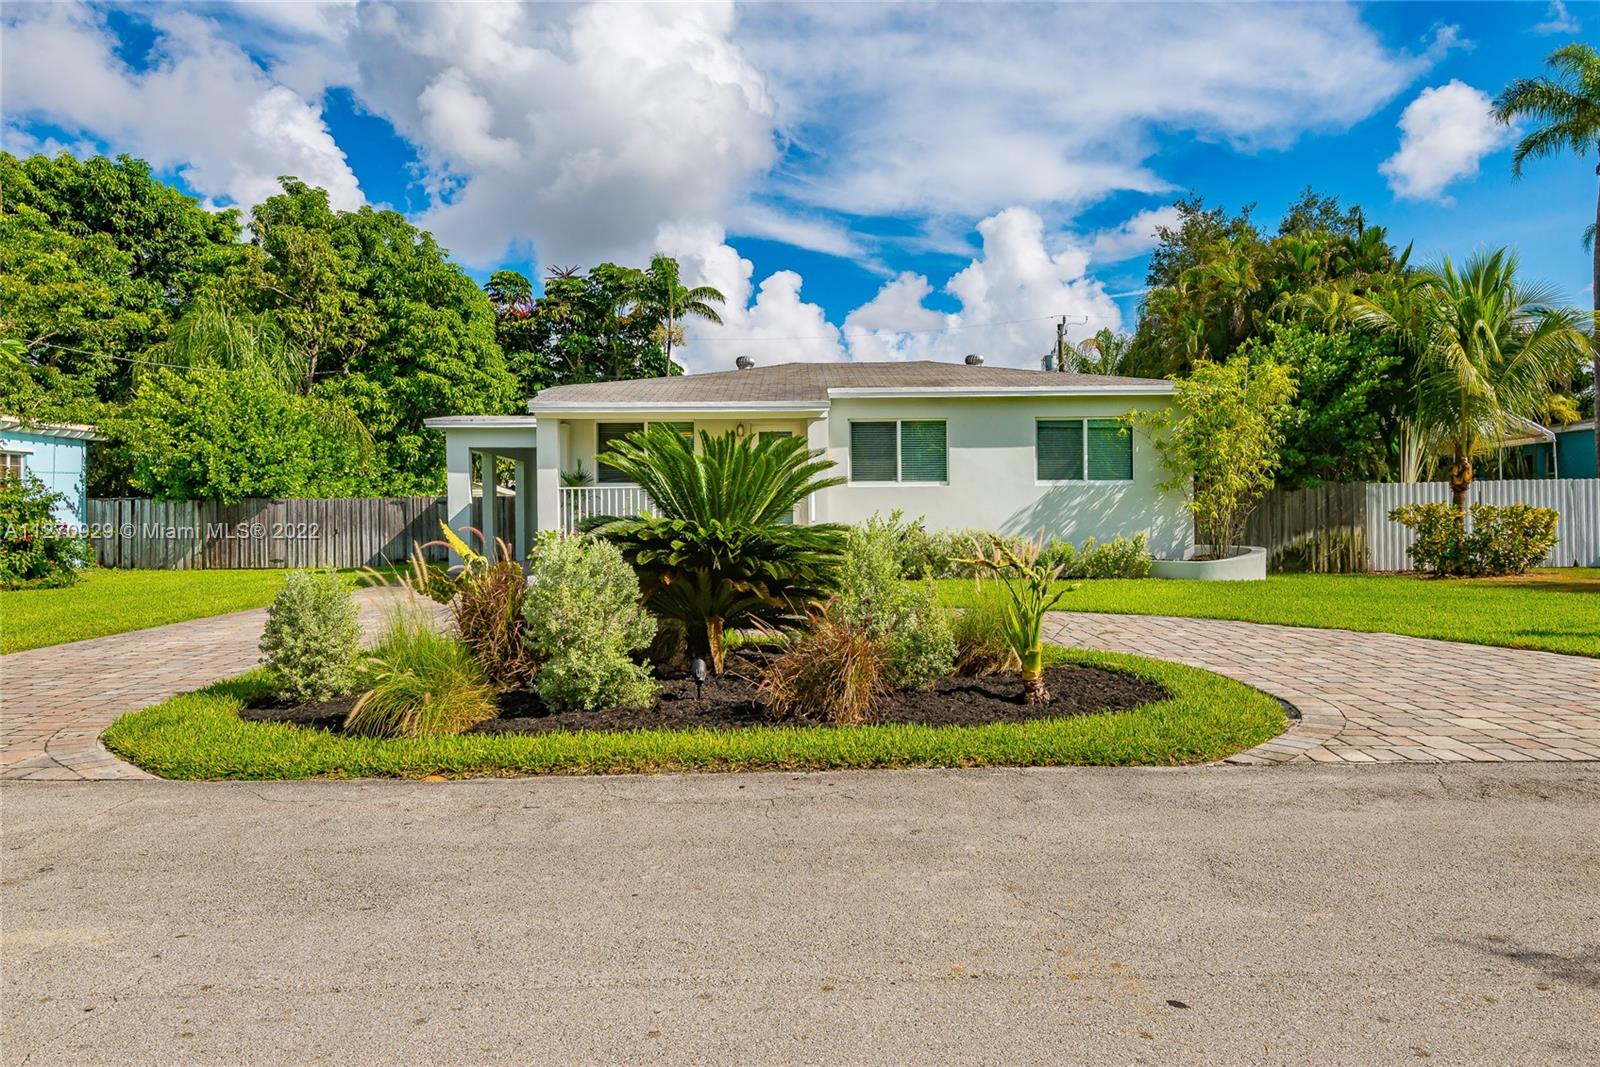 Prime South Miami location! Completely remodeled, including kitchen, bath, marble floors, impact doors and windows. There is plenty of parking on circular driveway plus carport with utility/storage room. This home sits on a fenced, 10,032 sq. ft. lot with plenty of room for a pool, space to park a boat and RV. Great location close to downtown South Miami, Dadeland, and Coral Gables.